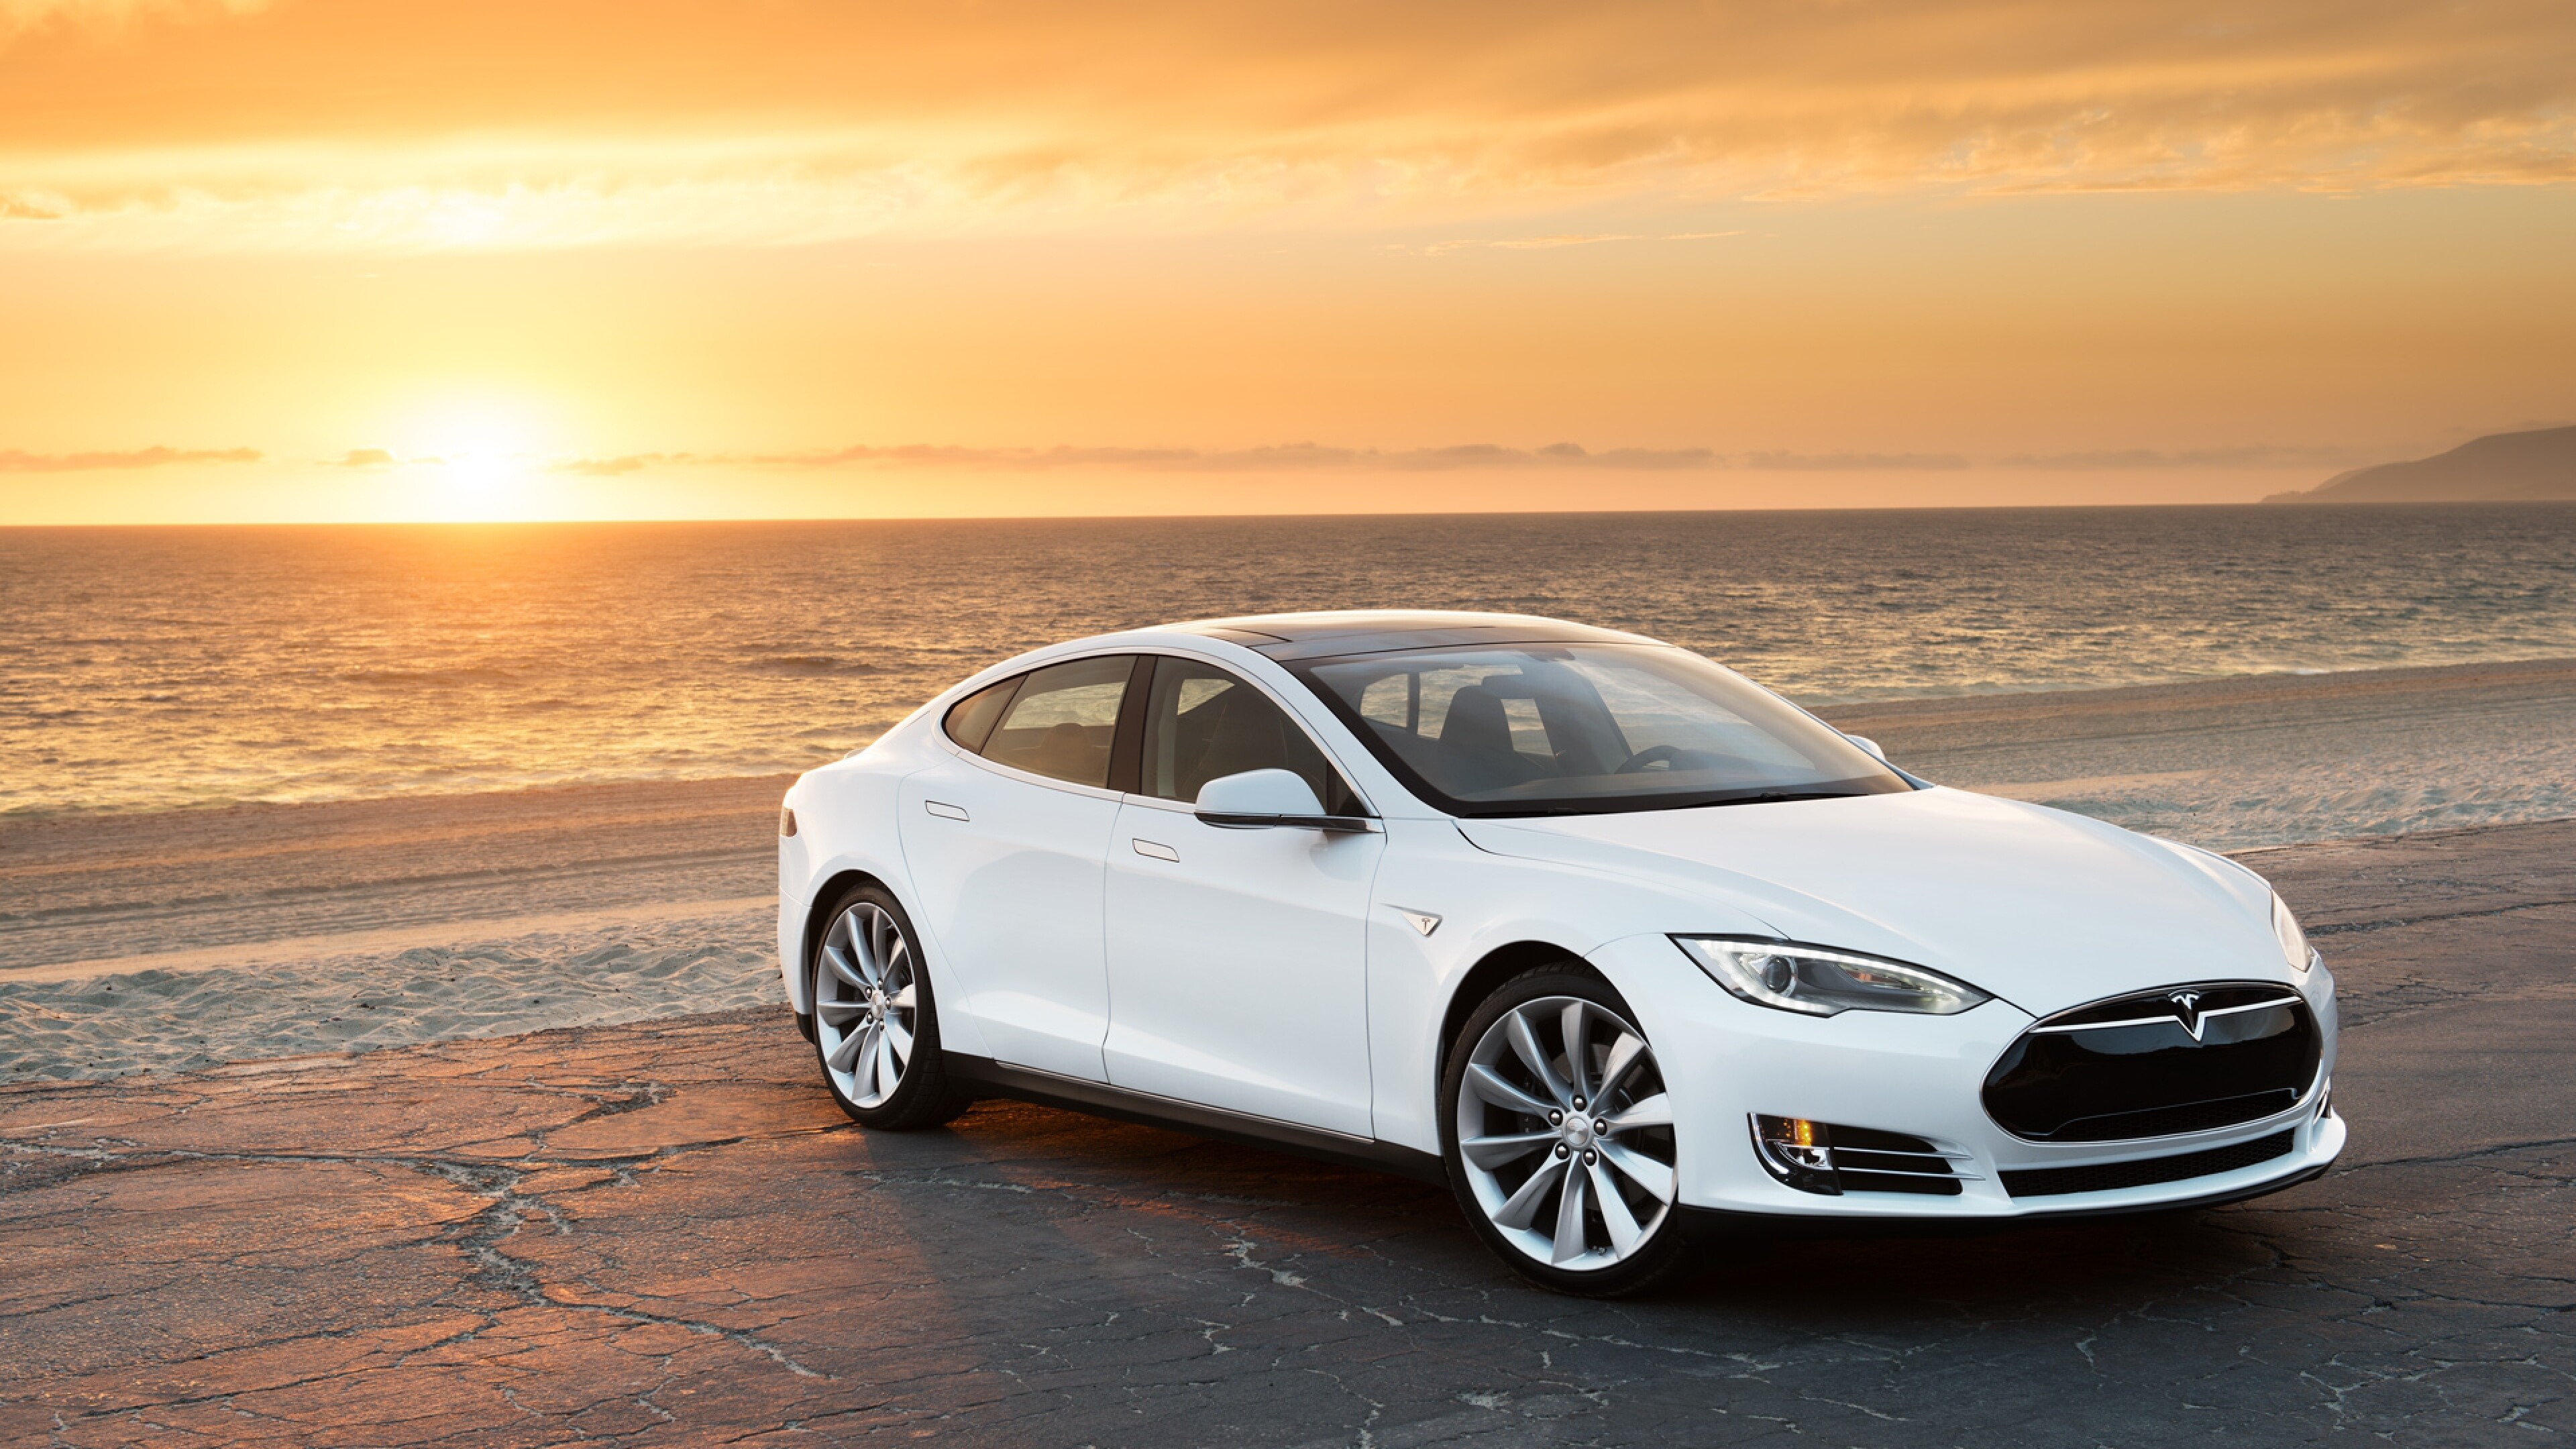 Tesla Model S: The first electric car to top the monthly new-car-sales ranking in any country. 3840x2160 4K Wallpaper.